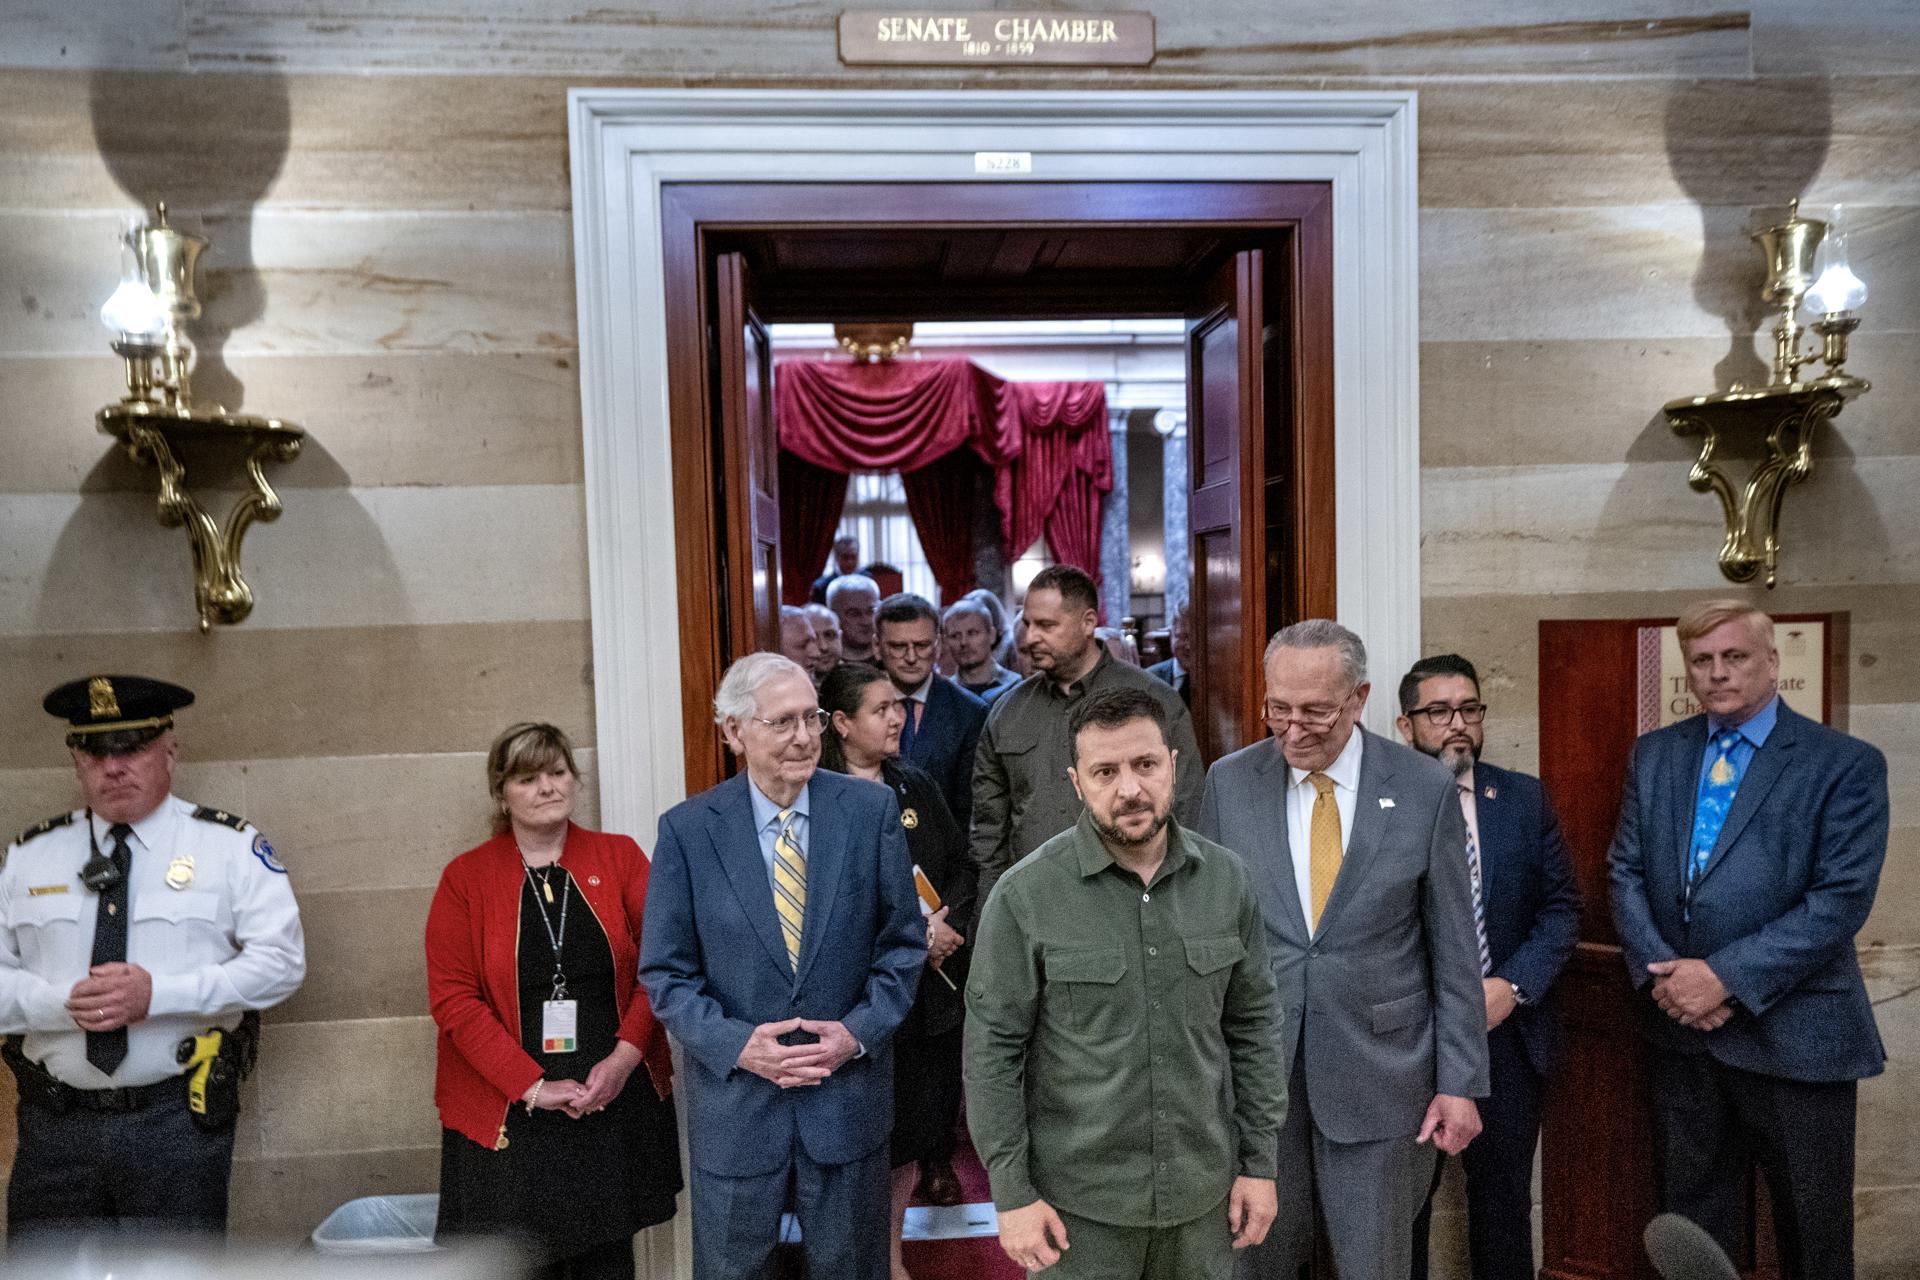 Washington (United States), 21/09/2023.- Ukrainian President Volodymyr Zelensky (C), flanked by US Senate Majority Leader Chuck Schumer (R) and US Senate Minority Leader Mitch McConnell (L), departs following a meeting with members of the US Senate in the Old Senate Chamber at the US Capitol in Washington, DC, USA, 21 September 2023. (Ucrania) EFE/EPA/SHAWN THEW / POOL
